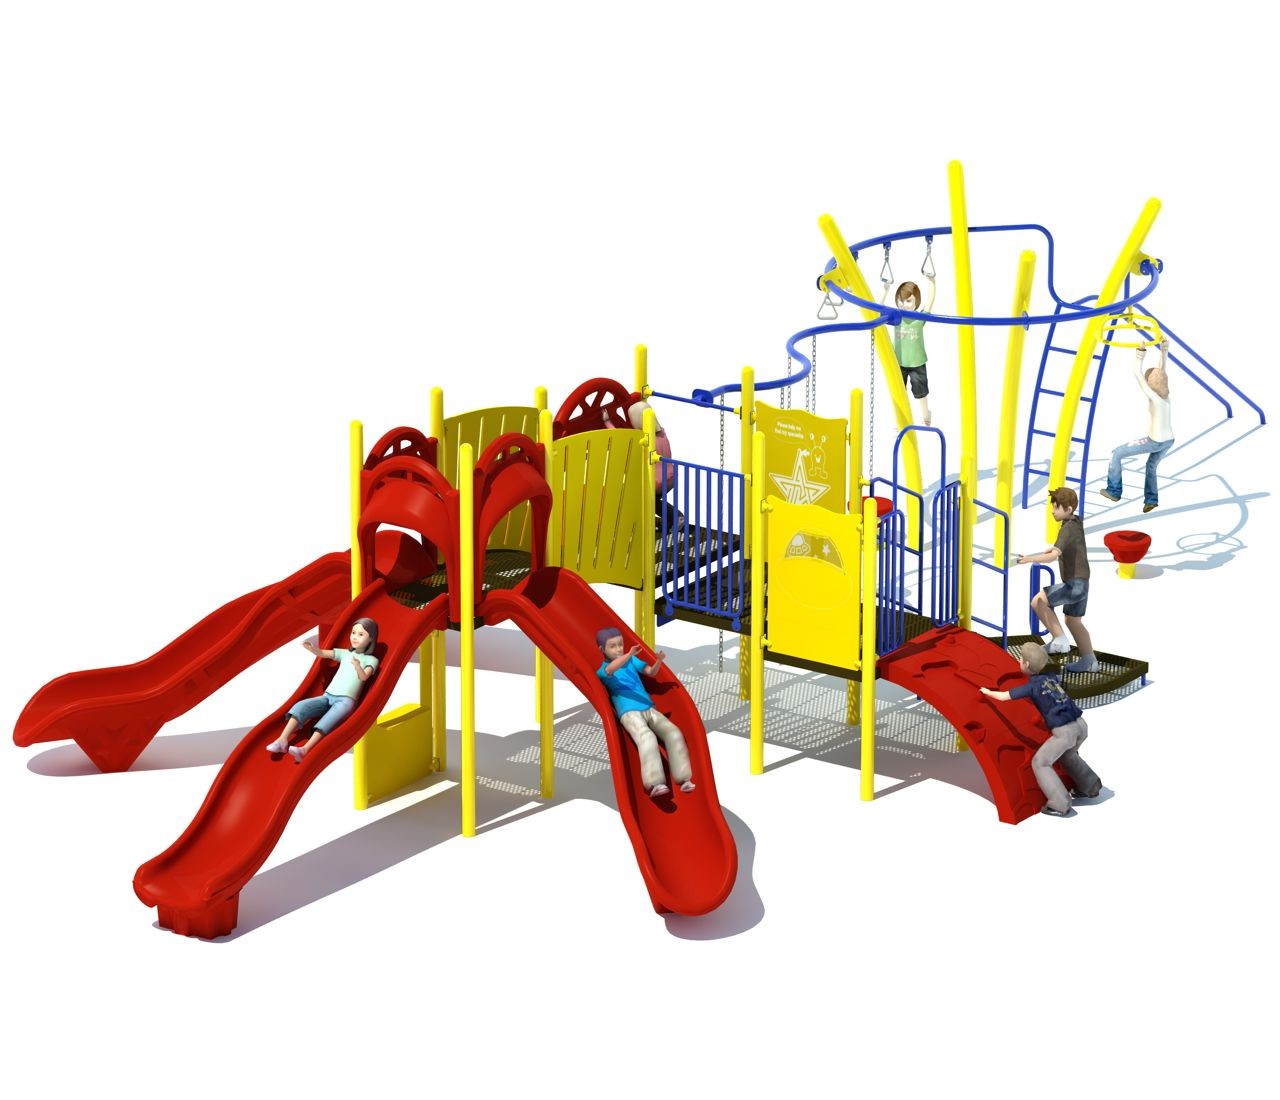 Pictures Of A Playground - ClipArt Best